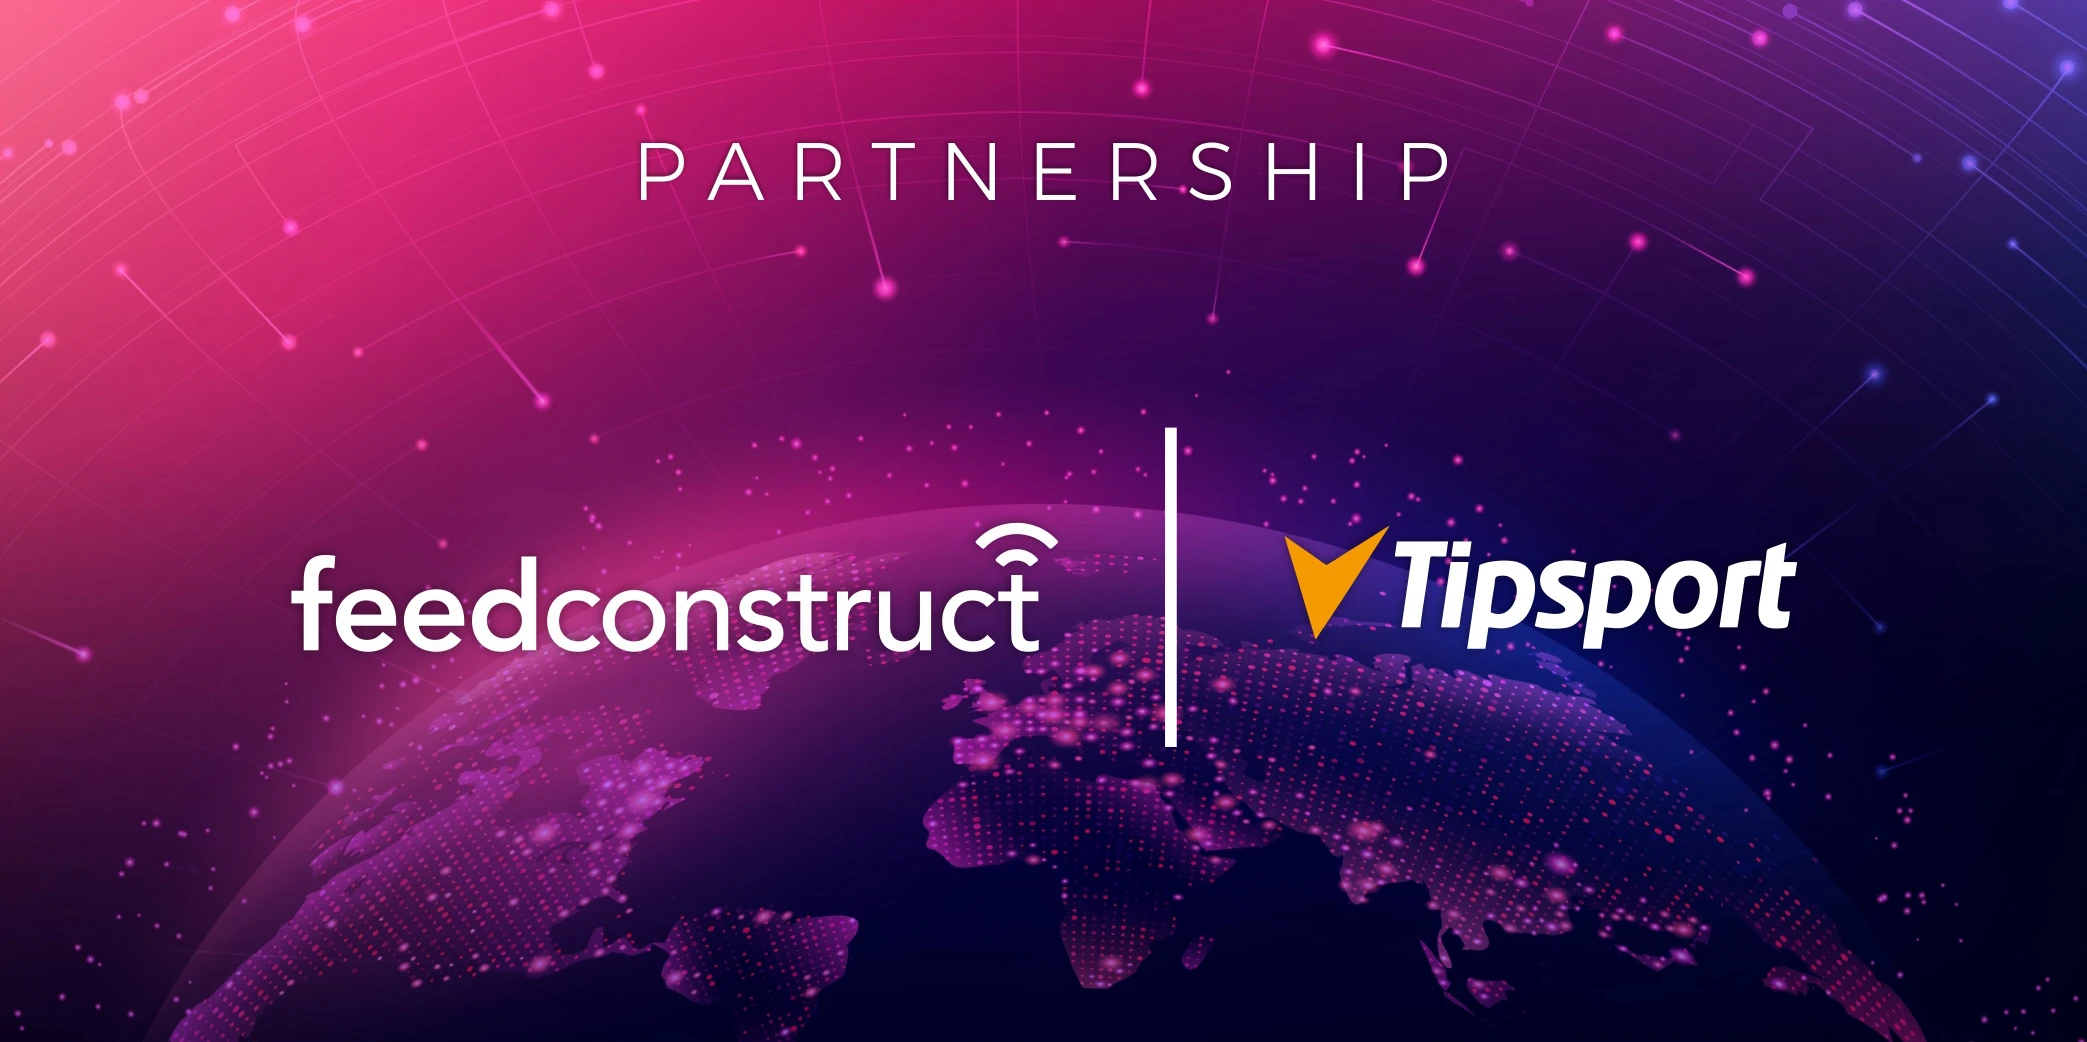 FeedConstruct is celebrating an extended partnership with Tipsport